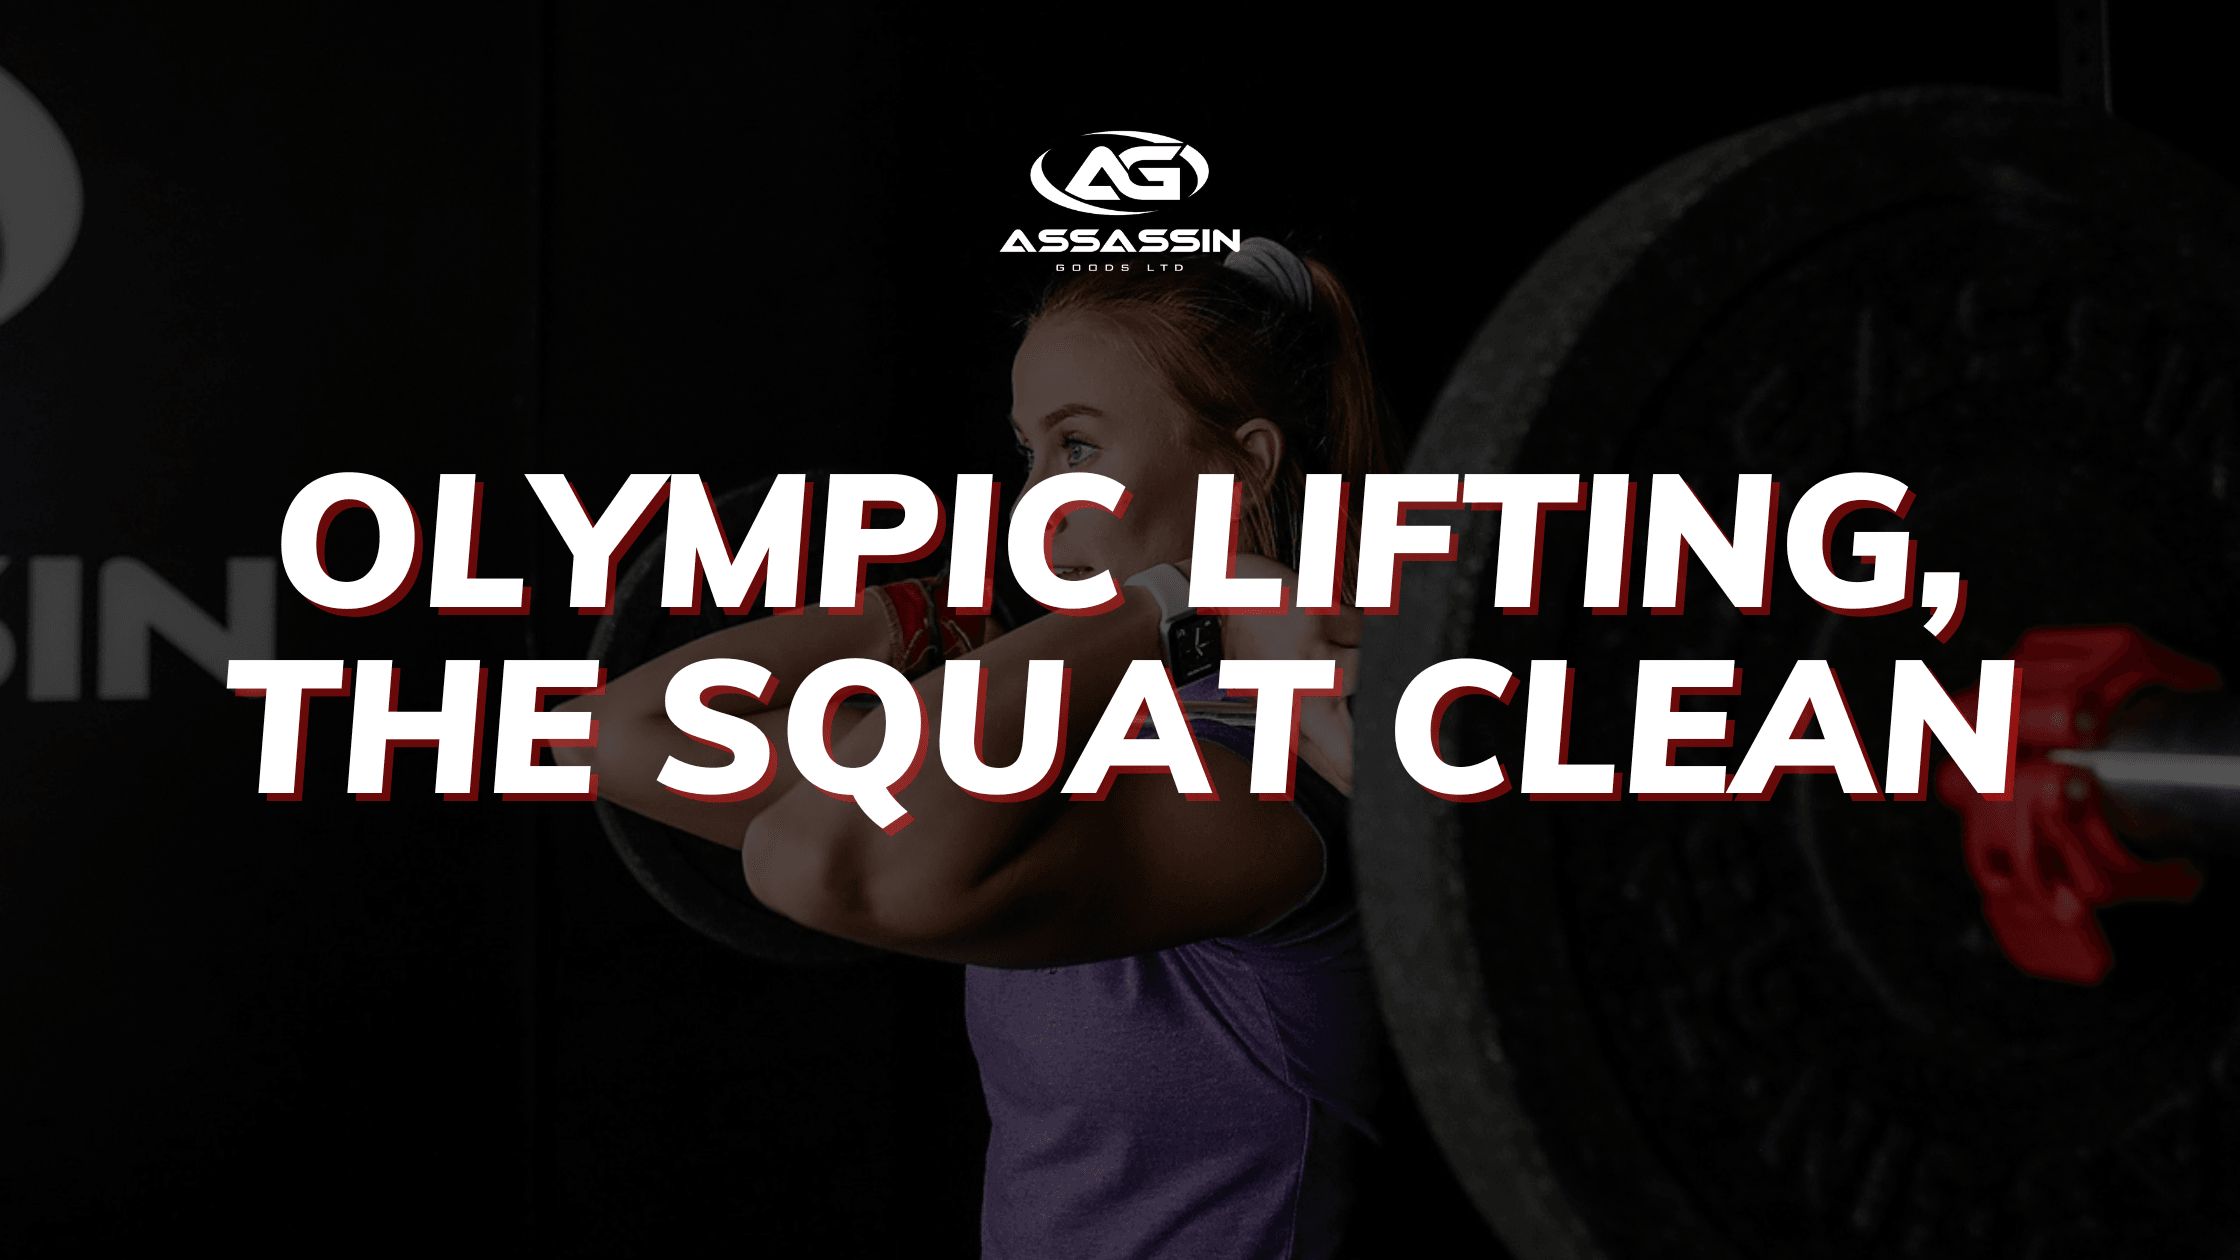 Olympic Lifting, The Squat Clean – Assassin Goods